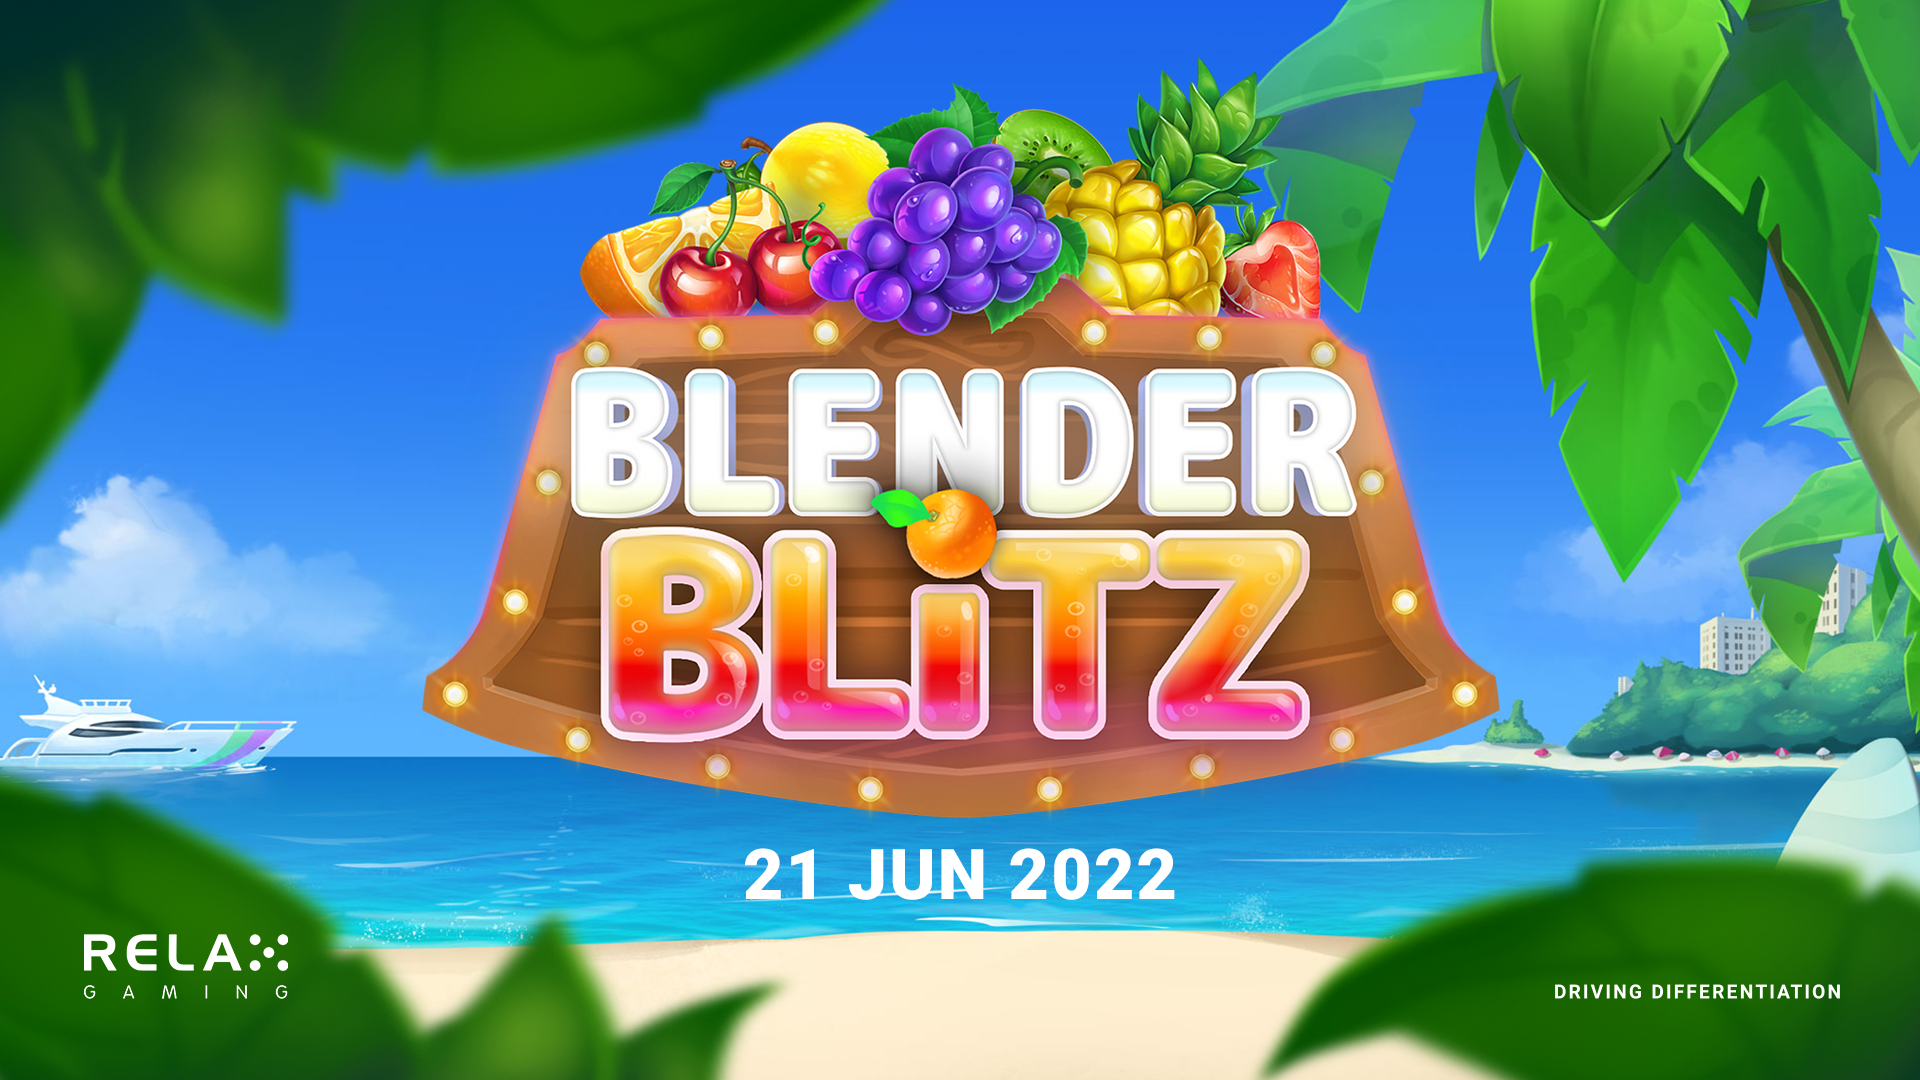 Summer is here with Relax Gaming’s Blender Blitz